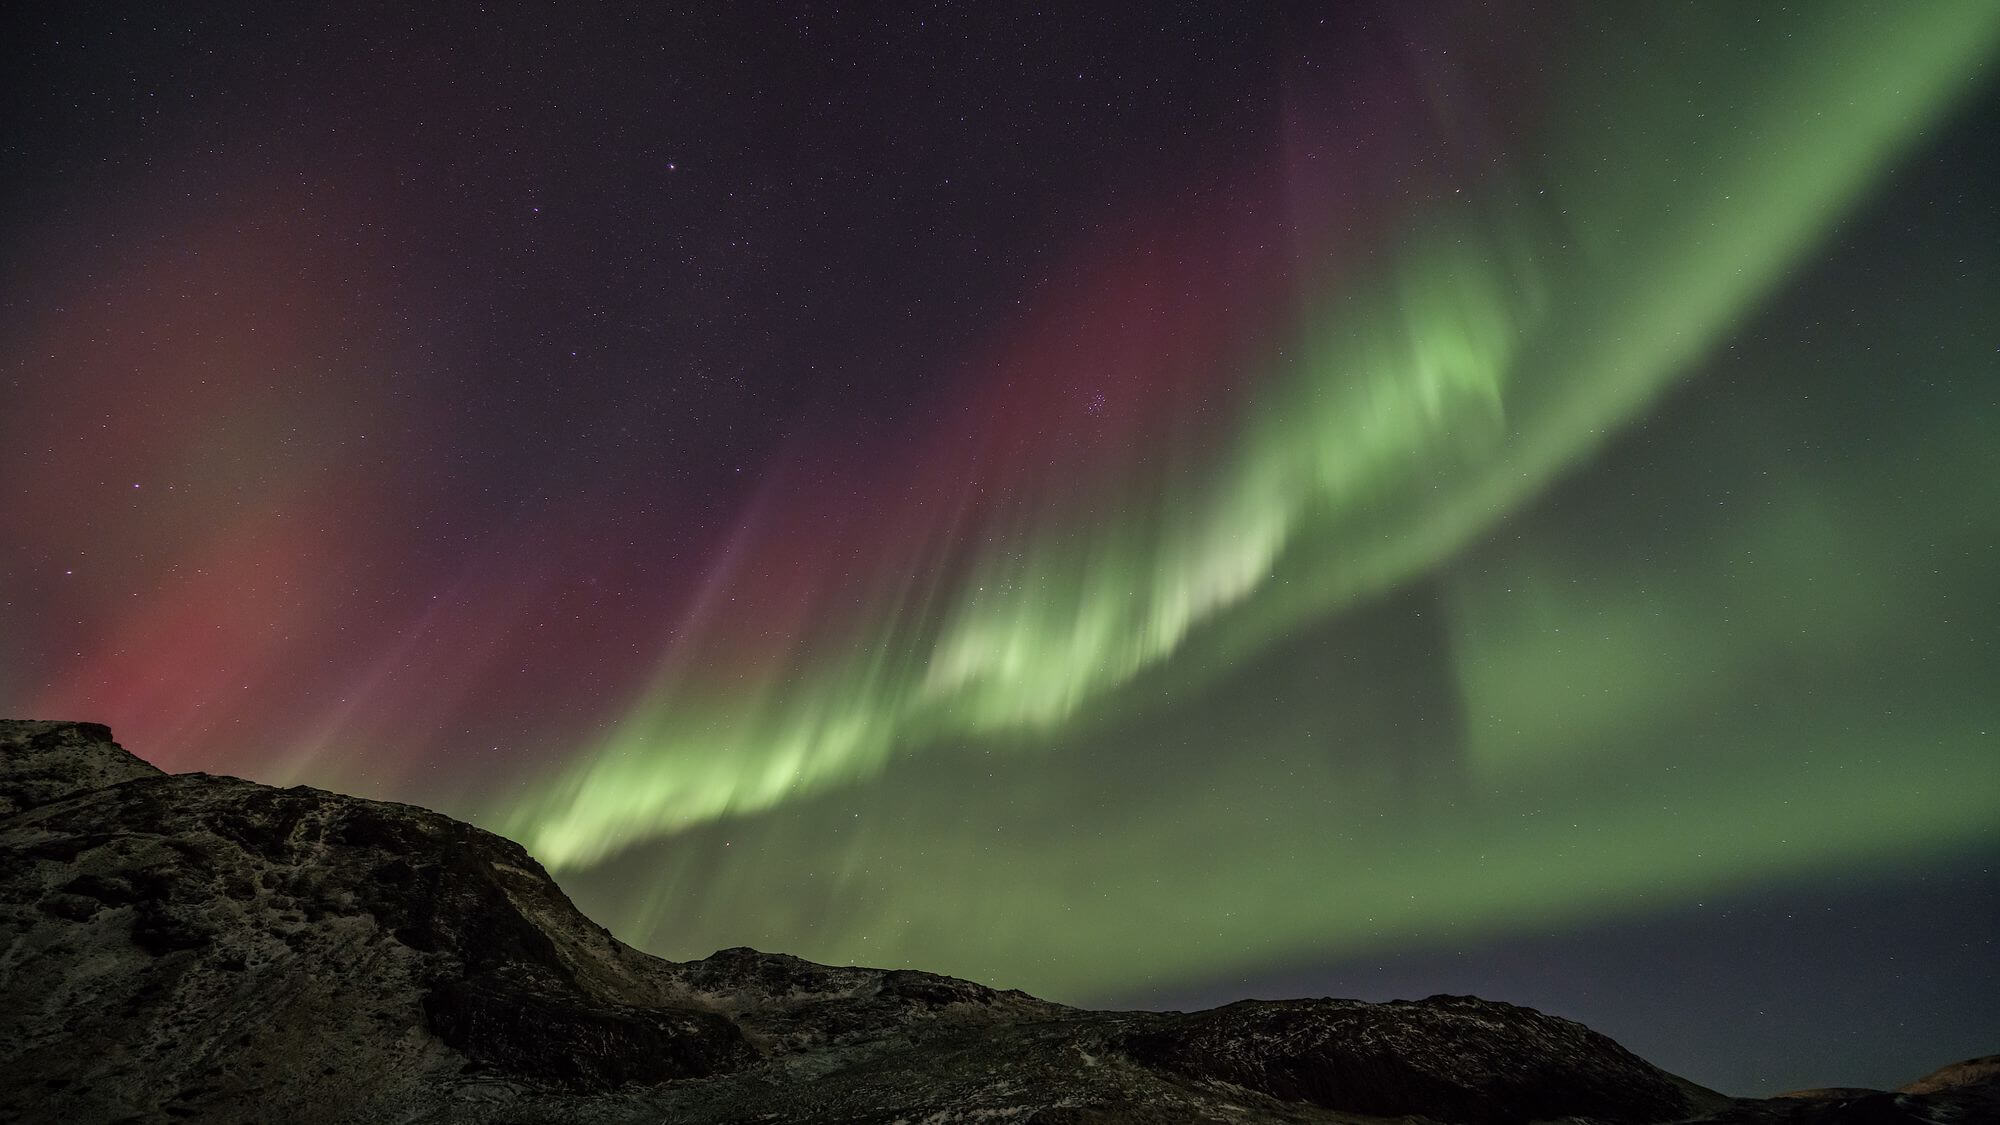 The northern lights illuminating landscape in January